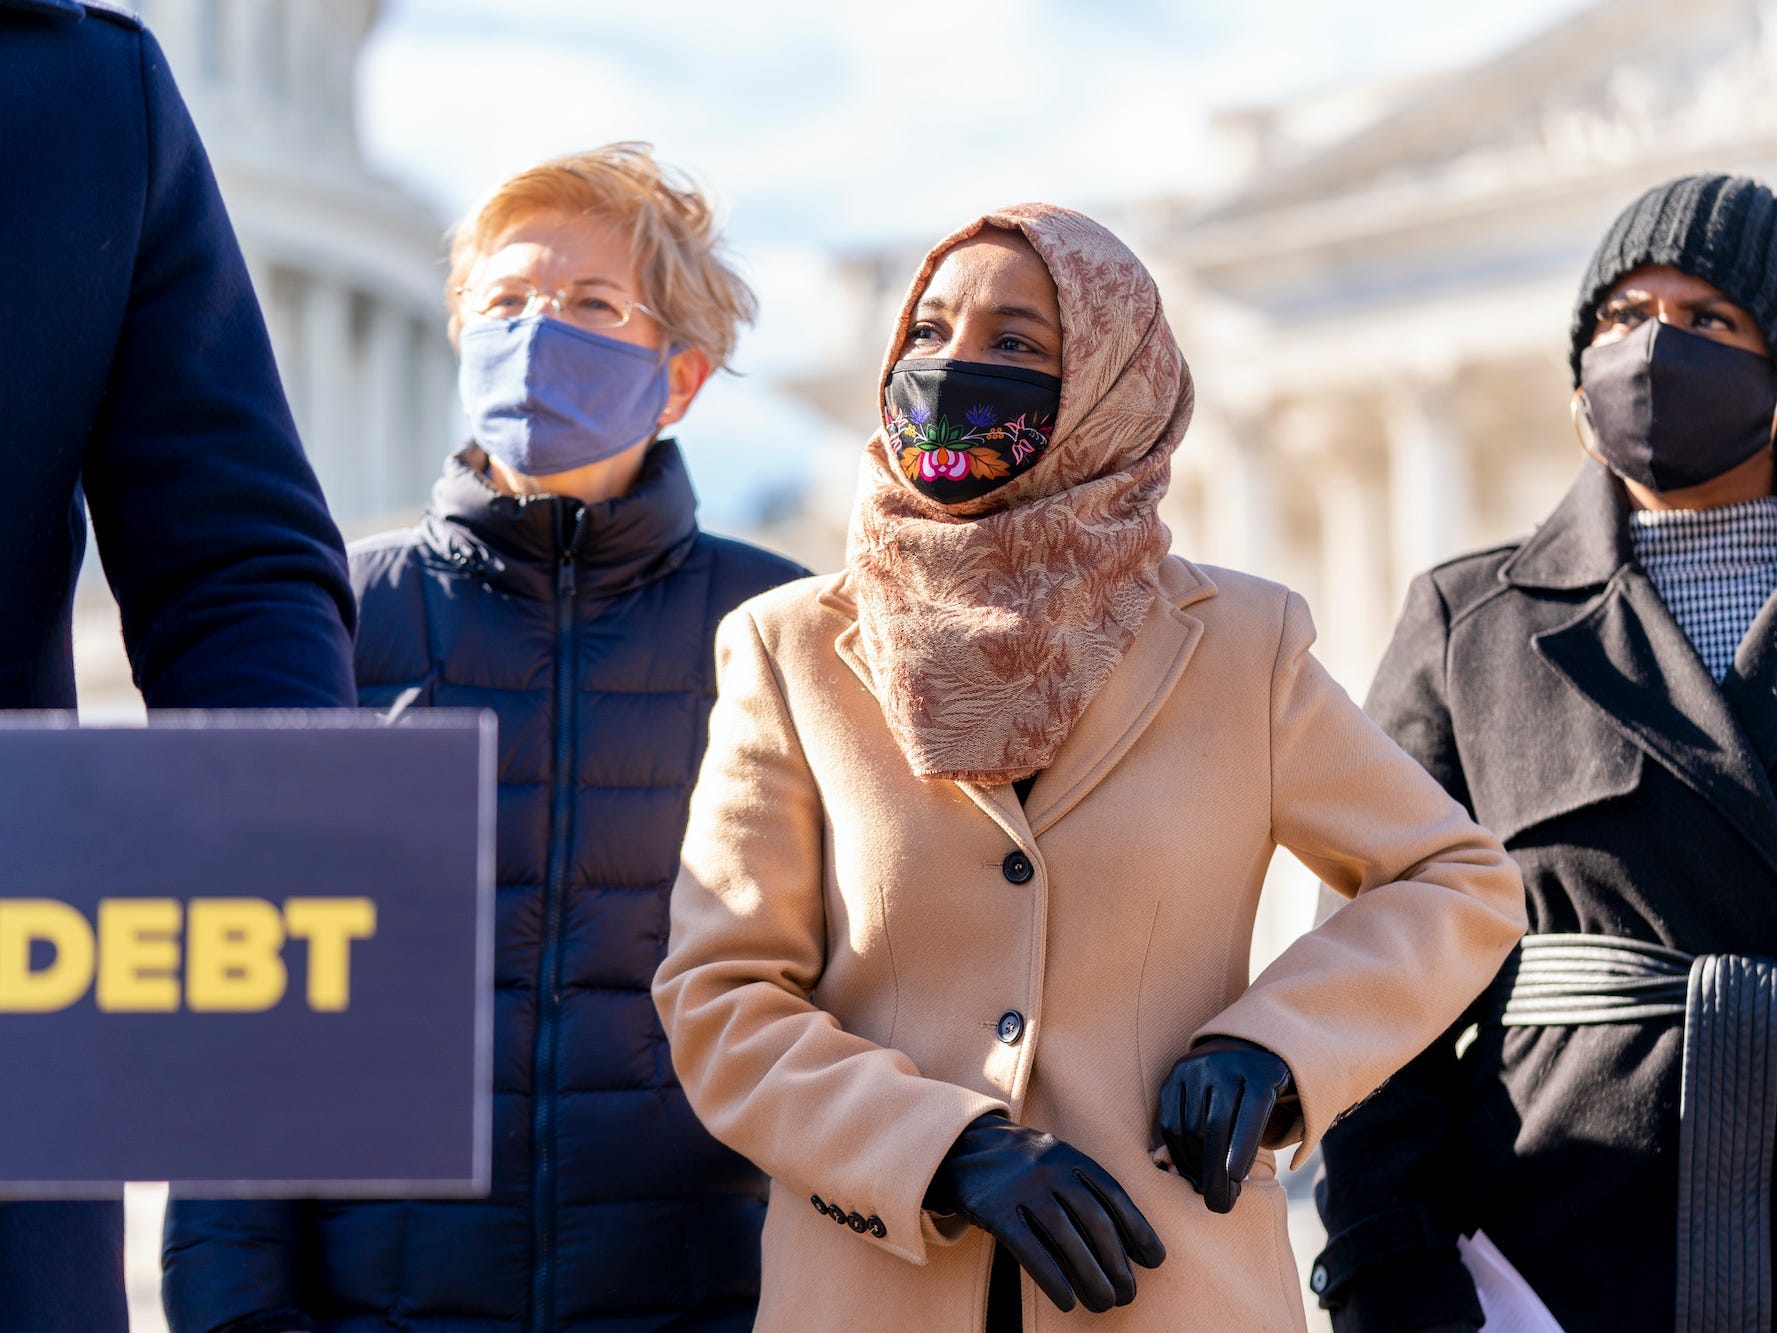 From left, Sen. Elizabeth Warren, D-Mass., Rep. Ilhan Omar, D-Minn., and Rep. Ayanna Pressley, D-Mass., appear at a news conference on Capitol Hill in Washington, Thursday, Feb. 4, 2021, about plans to reintroduce a resolution to call on President Biden to take executive action to cancel up to $50,000 in debt for federal student loan borrowers.